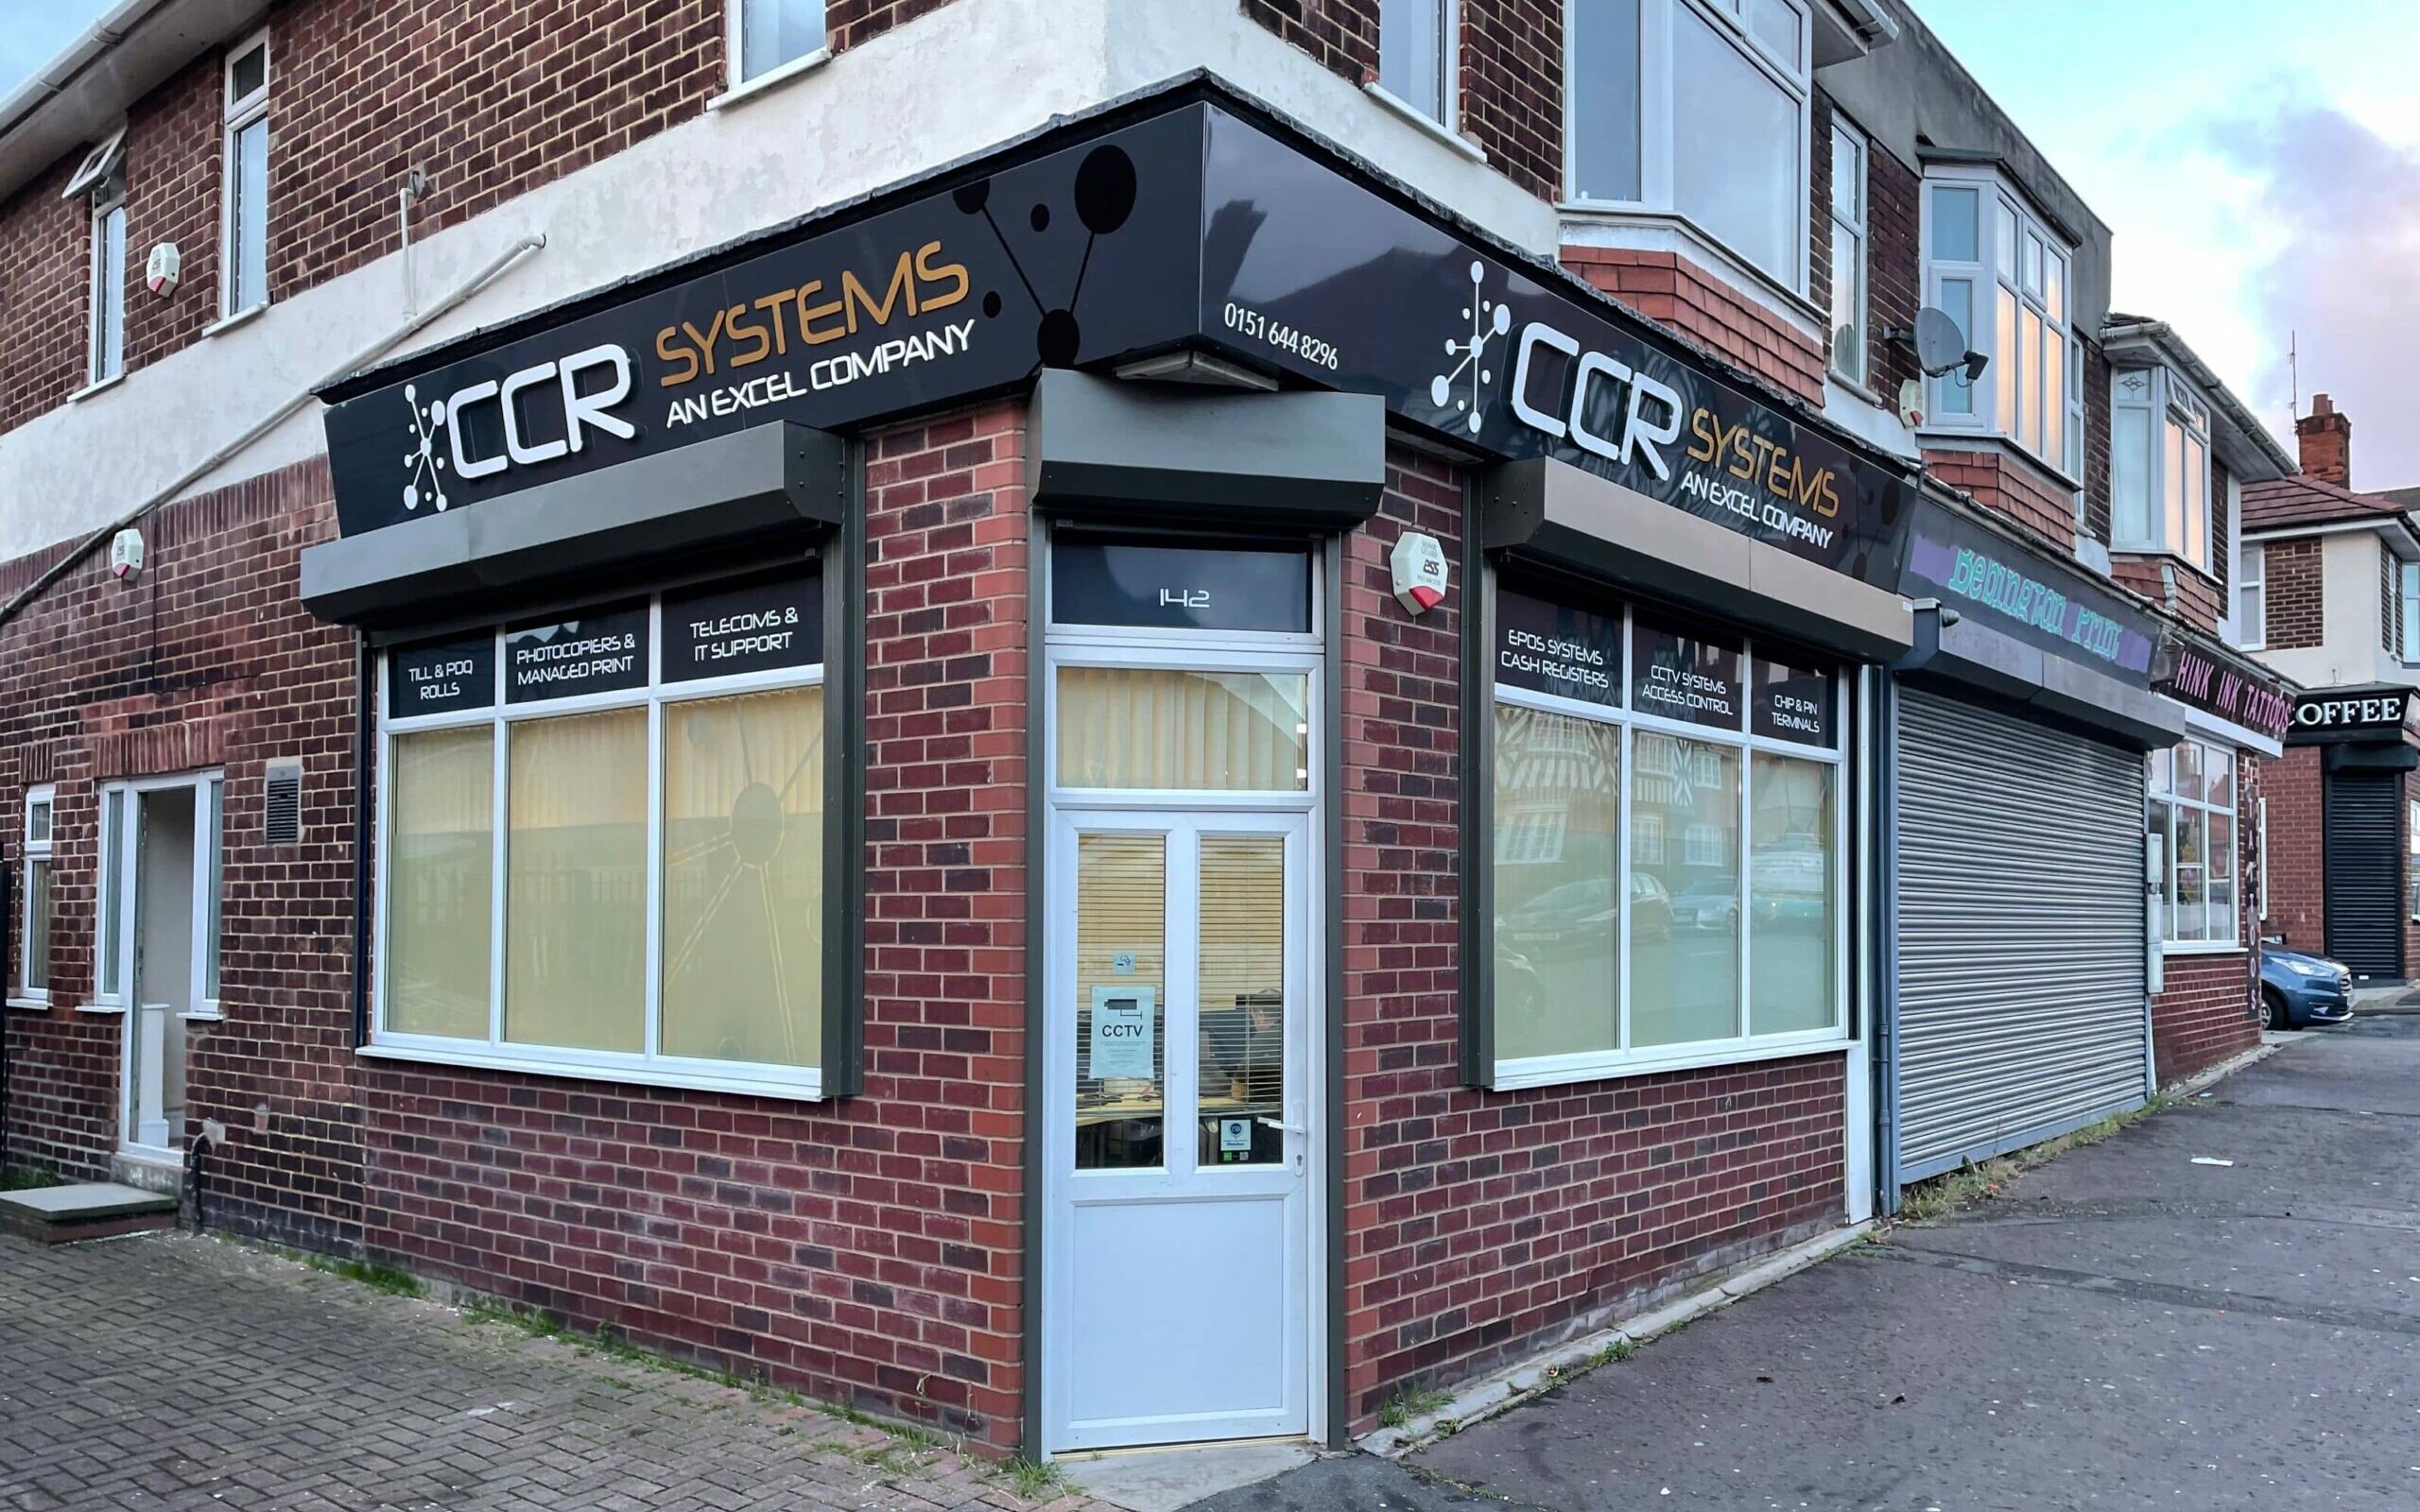 A picture of CCR Systems retail office in New Ferry, Wirral. The signage has a black background with white text and reads CCR Systems an Excel Company. The roller shutters have been painted black to match the signage. Above each of the windows, a different product is listed, ranging from cash registers to CCTV systems.